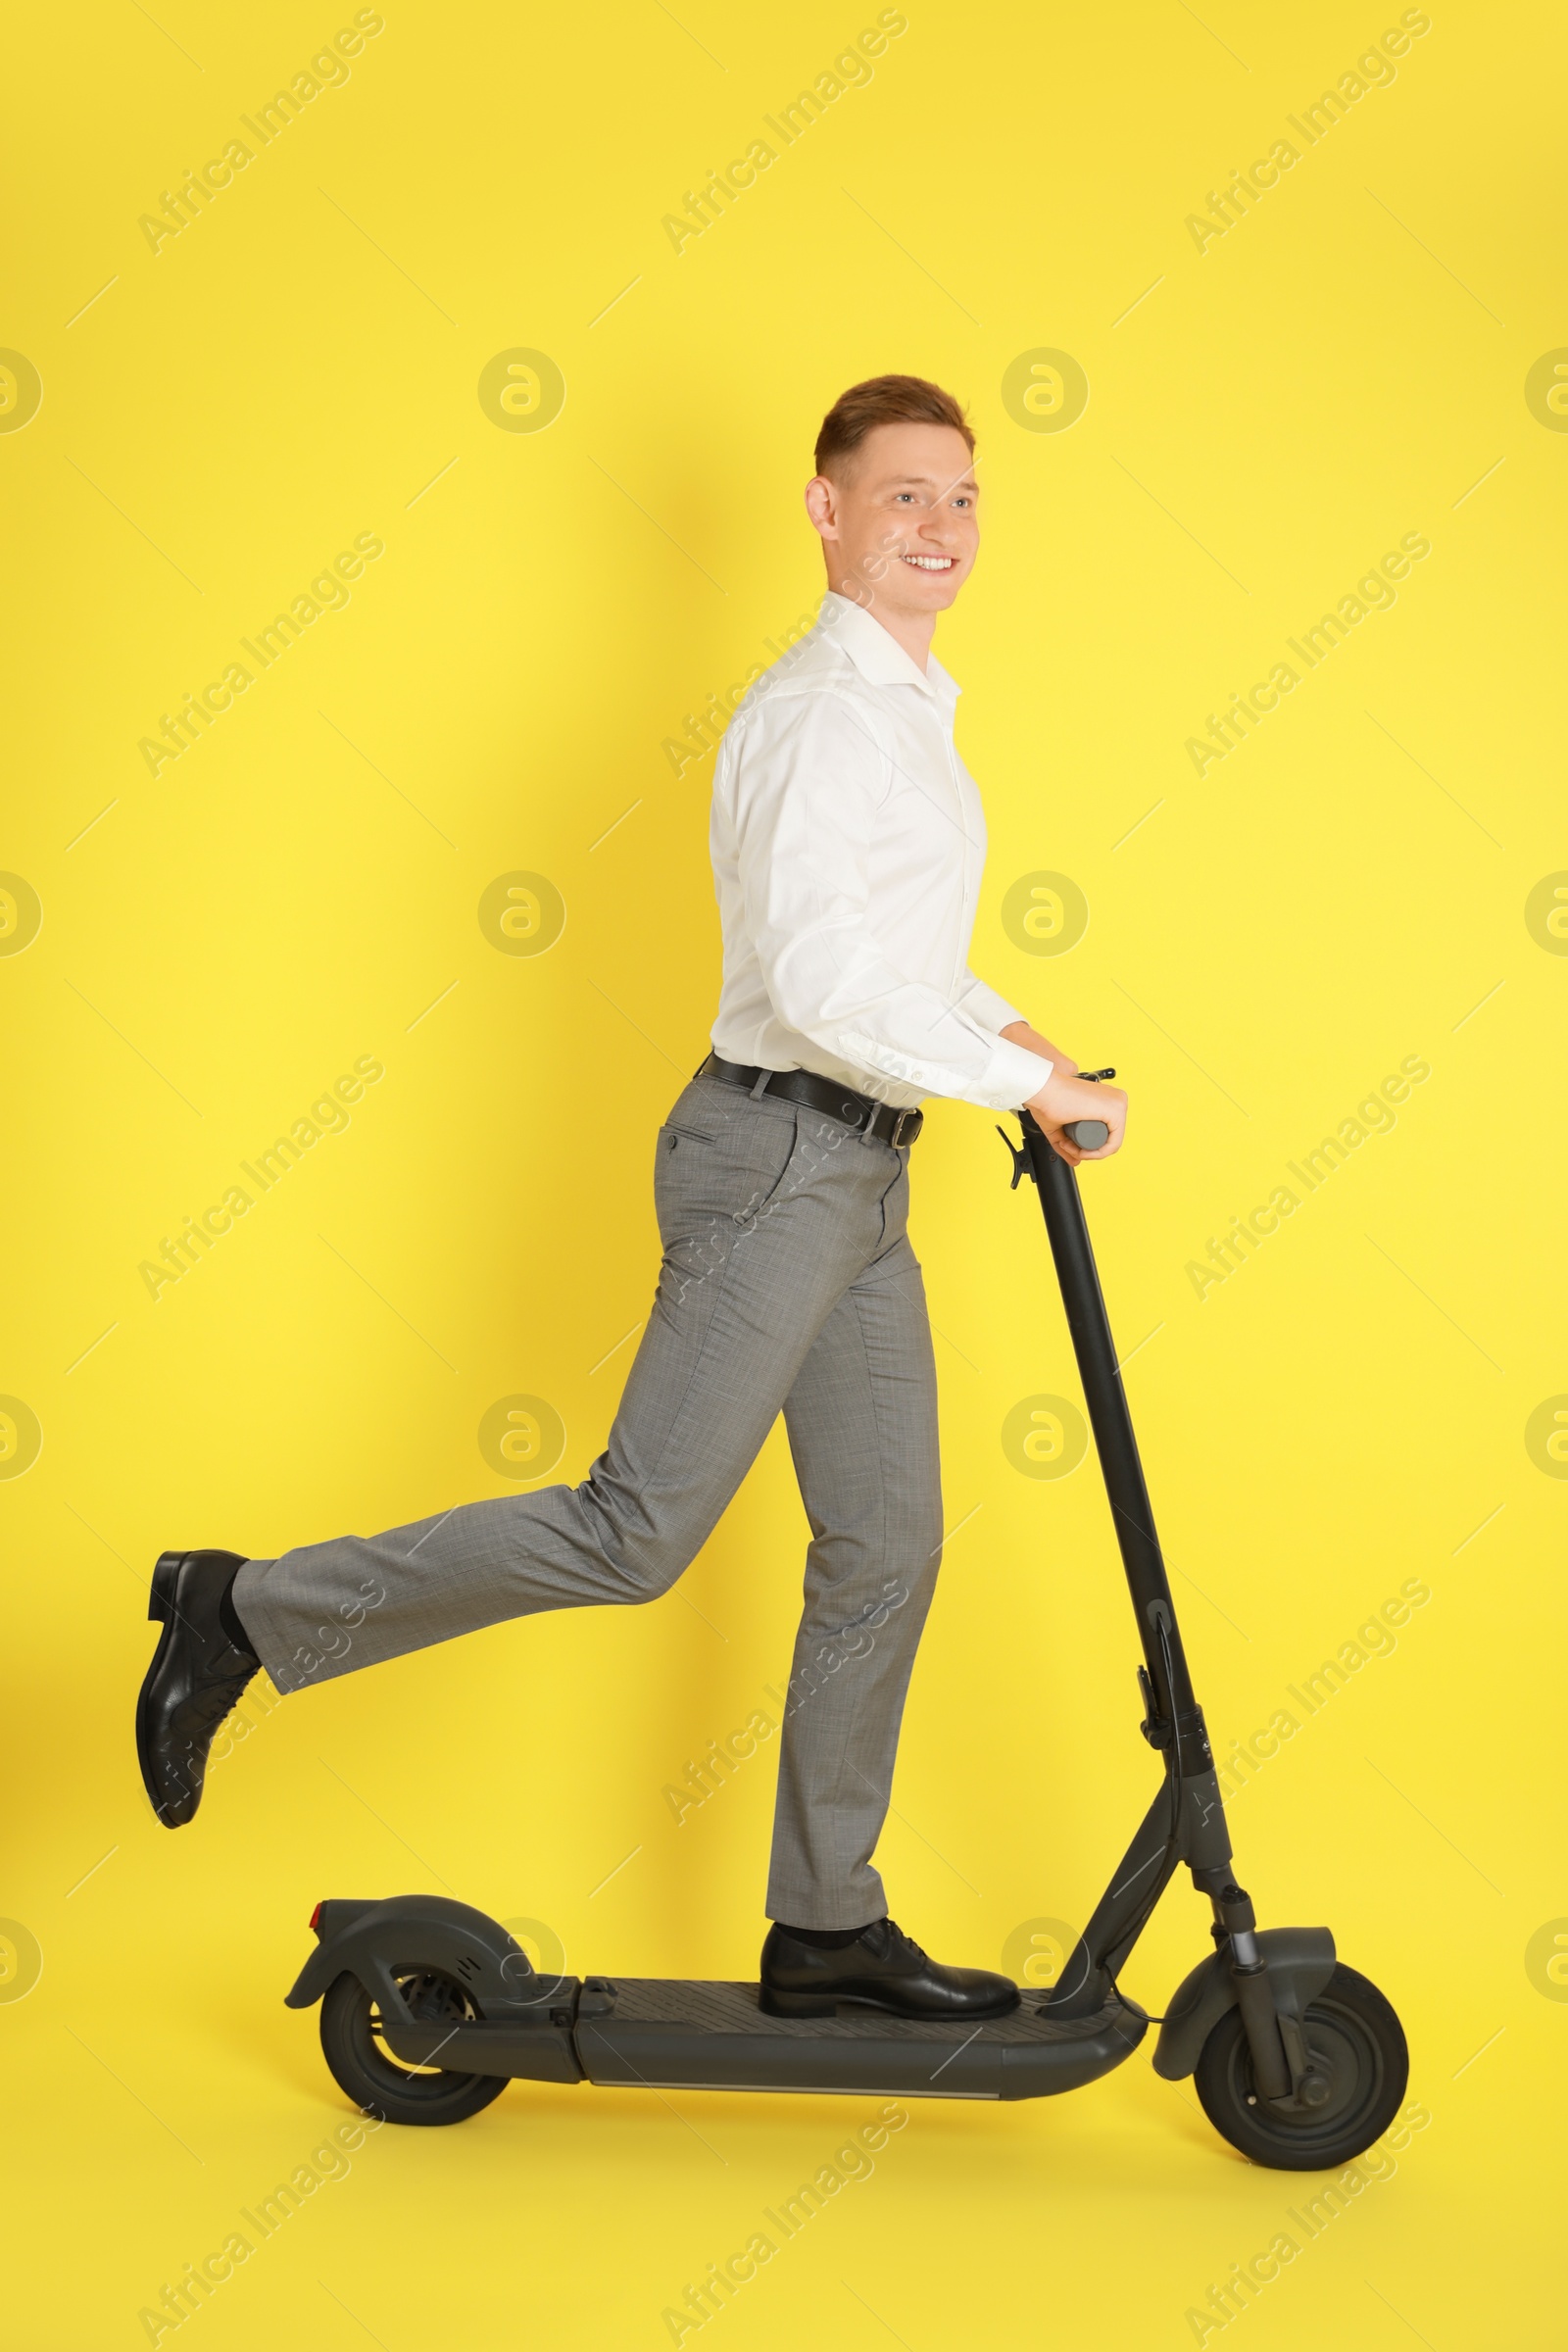 Photo of Happy man riding modern electric kick scooter on yellow background